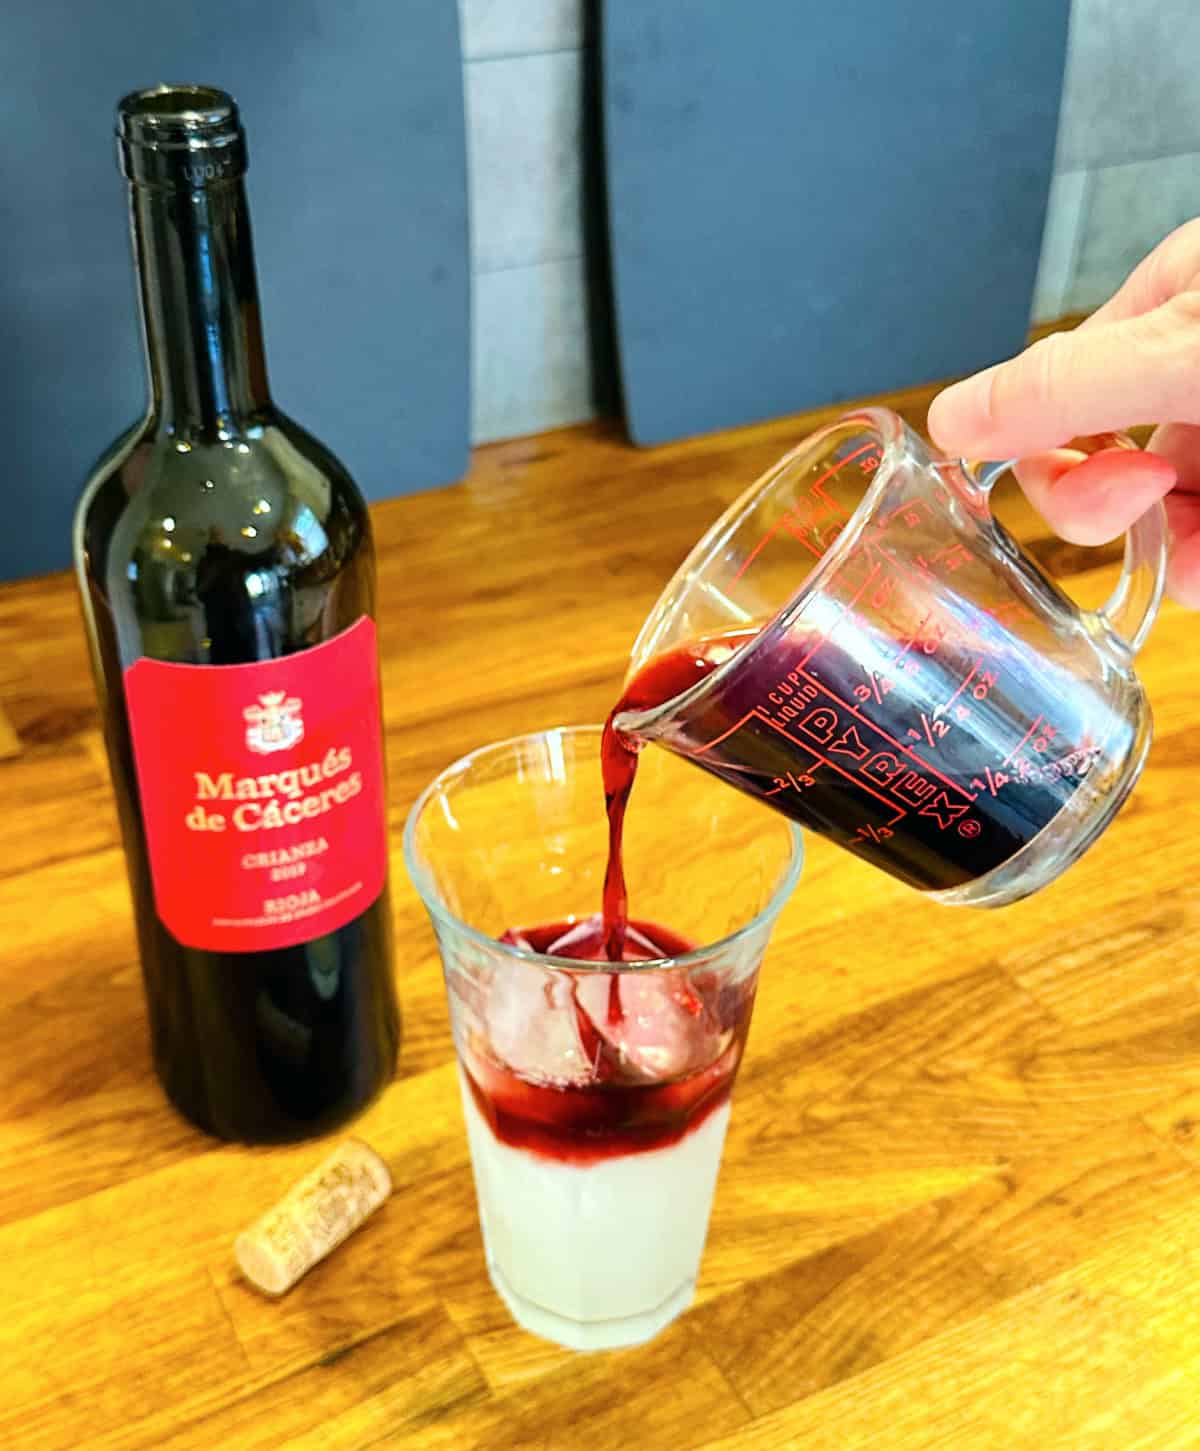 Dark red liquid being poured from a glass measuring cup into a tall glass of pale yellow liquid and ice next to a bottle of red wine.